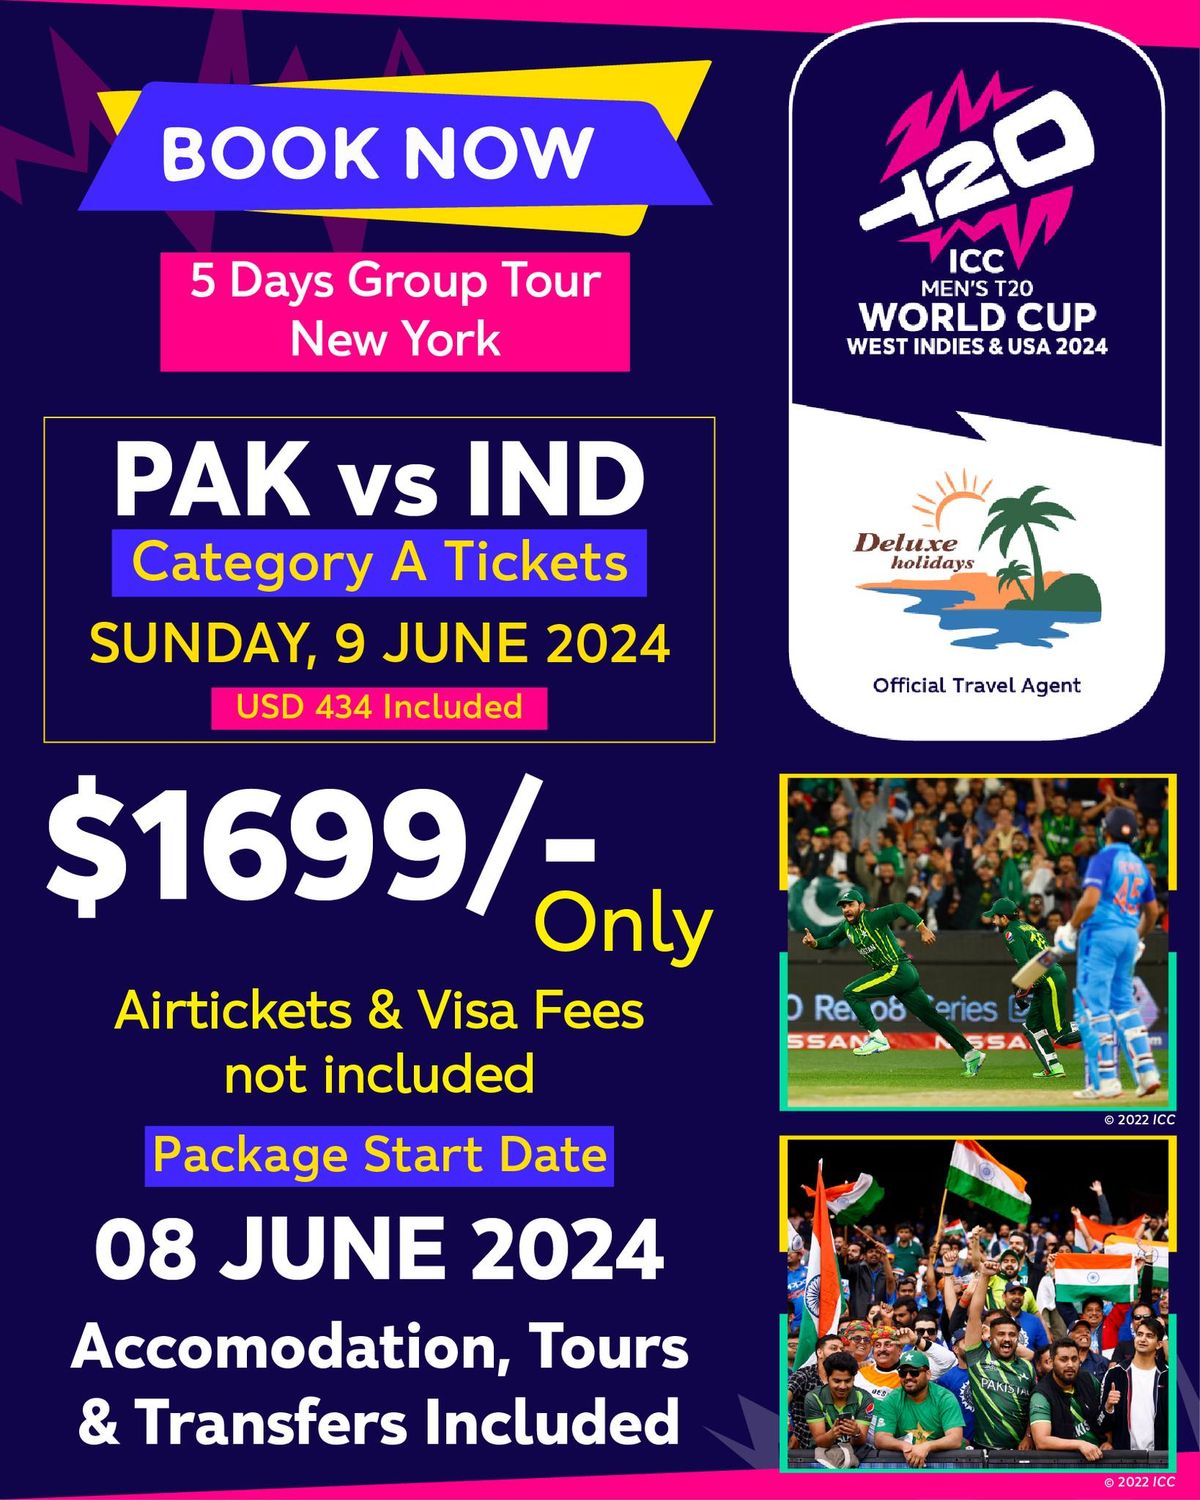 USA T20 WORLD CUP 5 DAYS GROUP TOUR! \ud83c\udfcf\ud83c\udf0e  PAKISTAN VS INDIA EXPERIENCE IN NEW YORK, USA! \ud83c\uddf5\ud83c\uddf0\ud83c\uddee\ud83c\uddf3